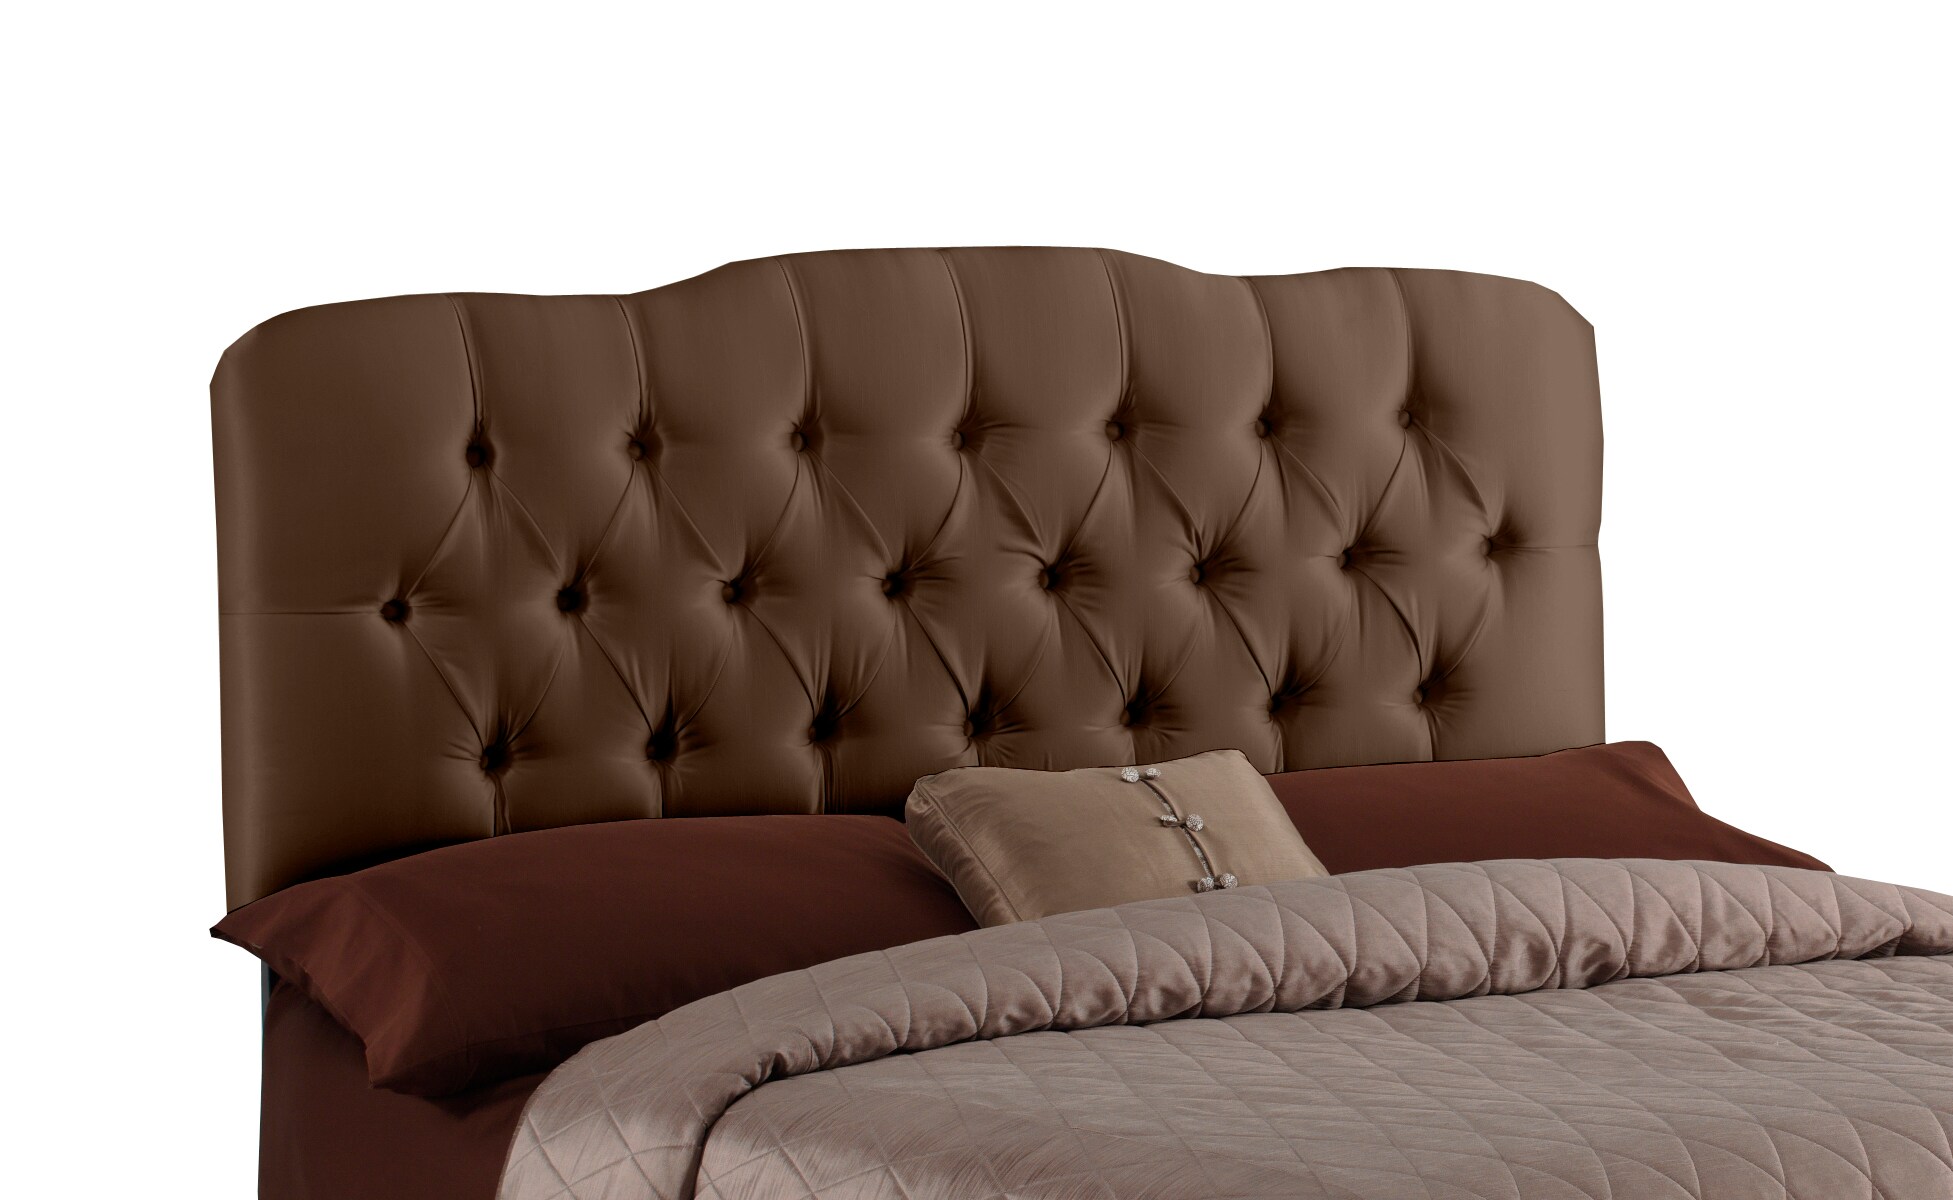 Skyline Furniture Quincy Collection Chocolate Full Textured Cotton  Headboard at